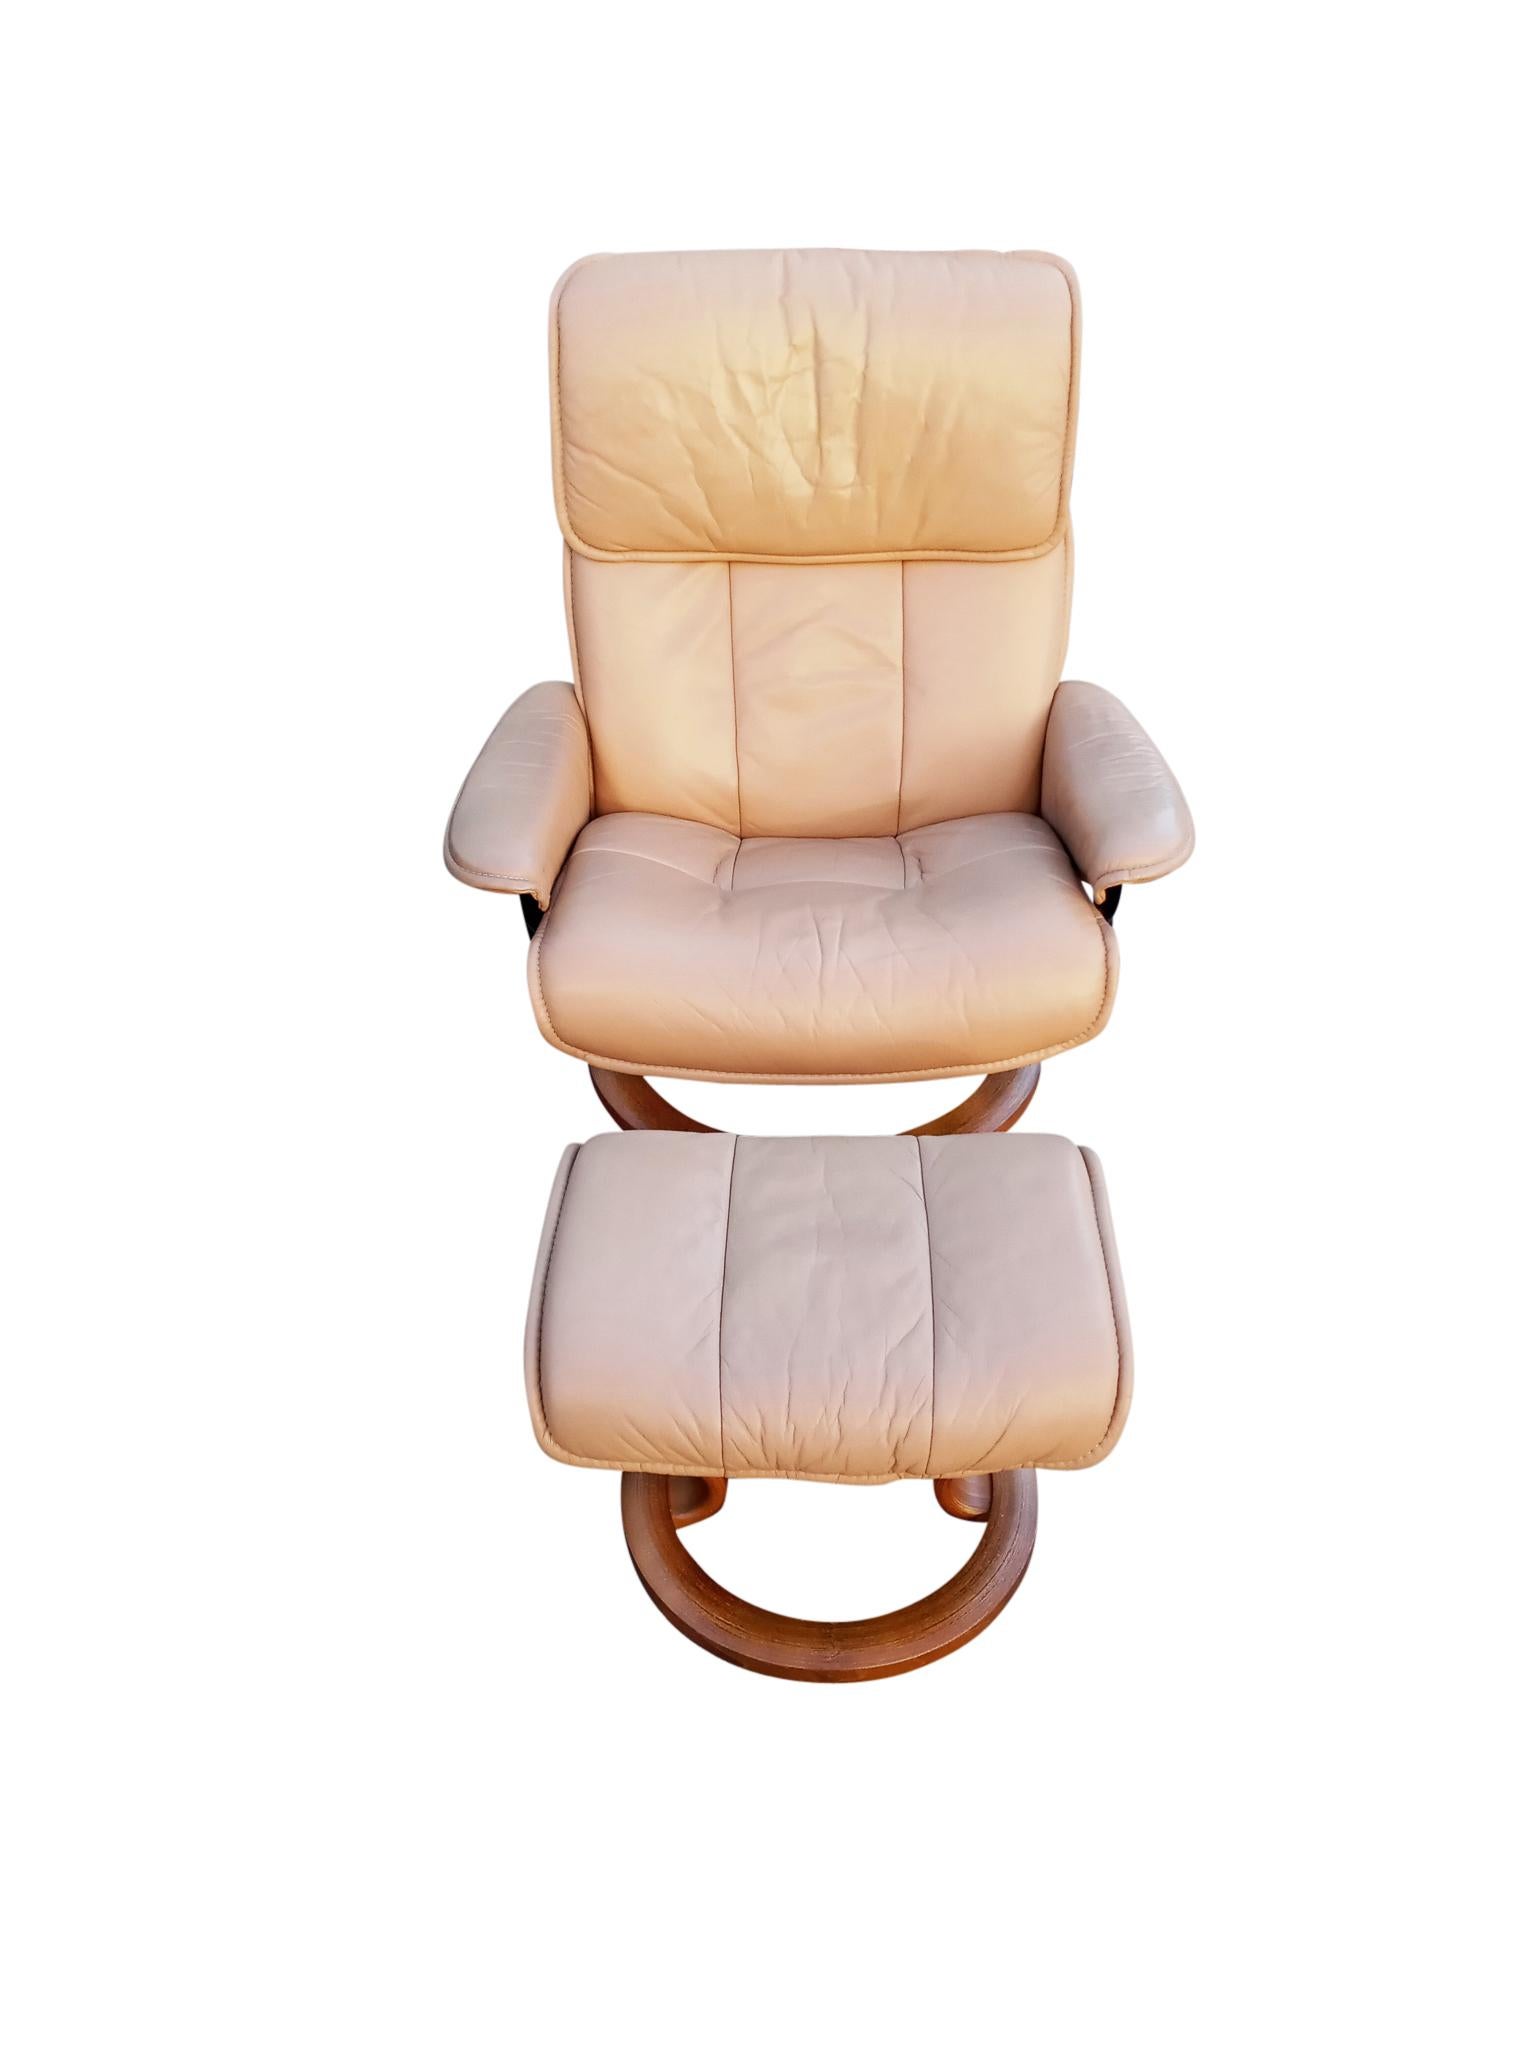 A Scandinavian style recliner and ottoman by Ekornes, their Stressless brand. With teak wood bases and metal frame and genuine leather upholstery, this is a comfortable sand color leather recliner on a round teak wood base that swivels 360 degrees.